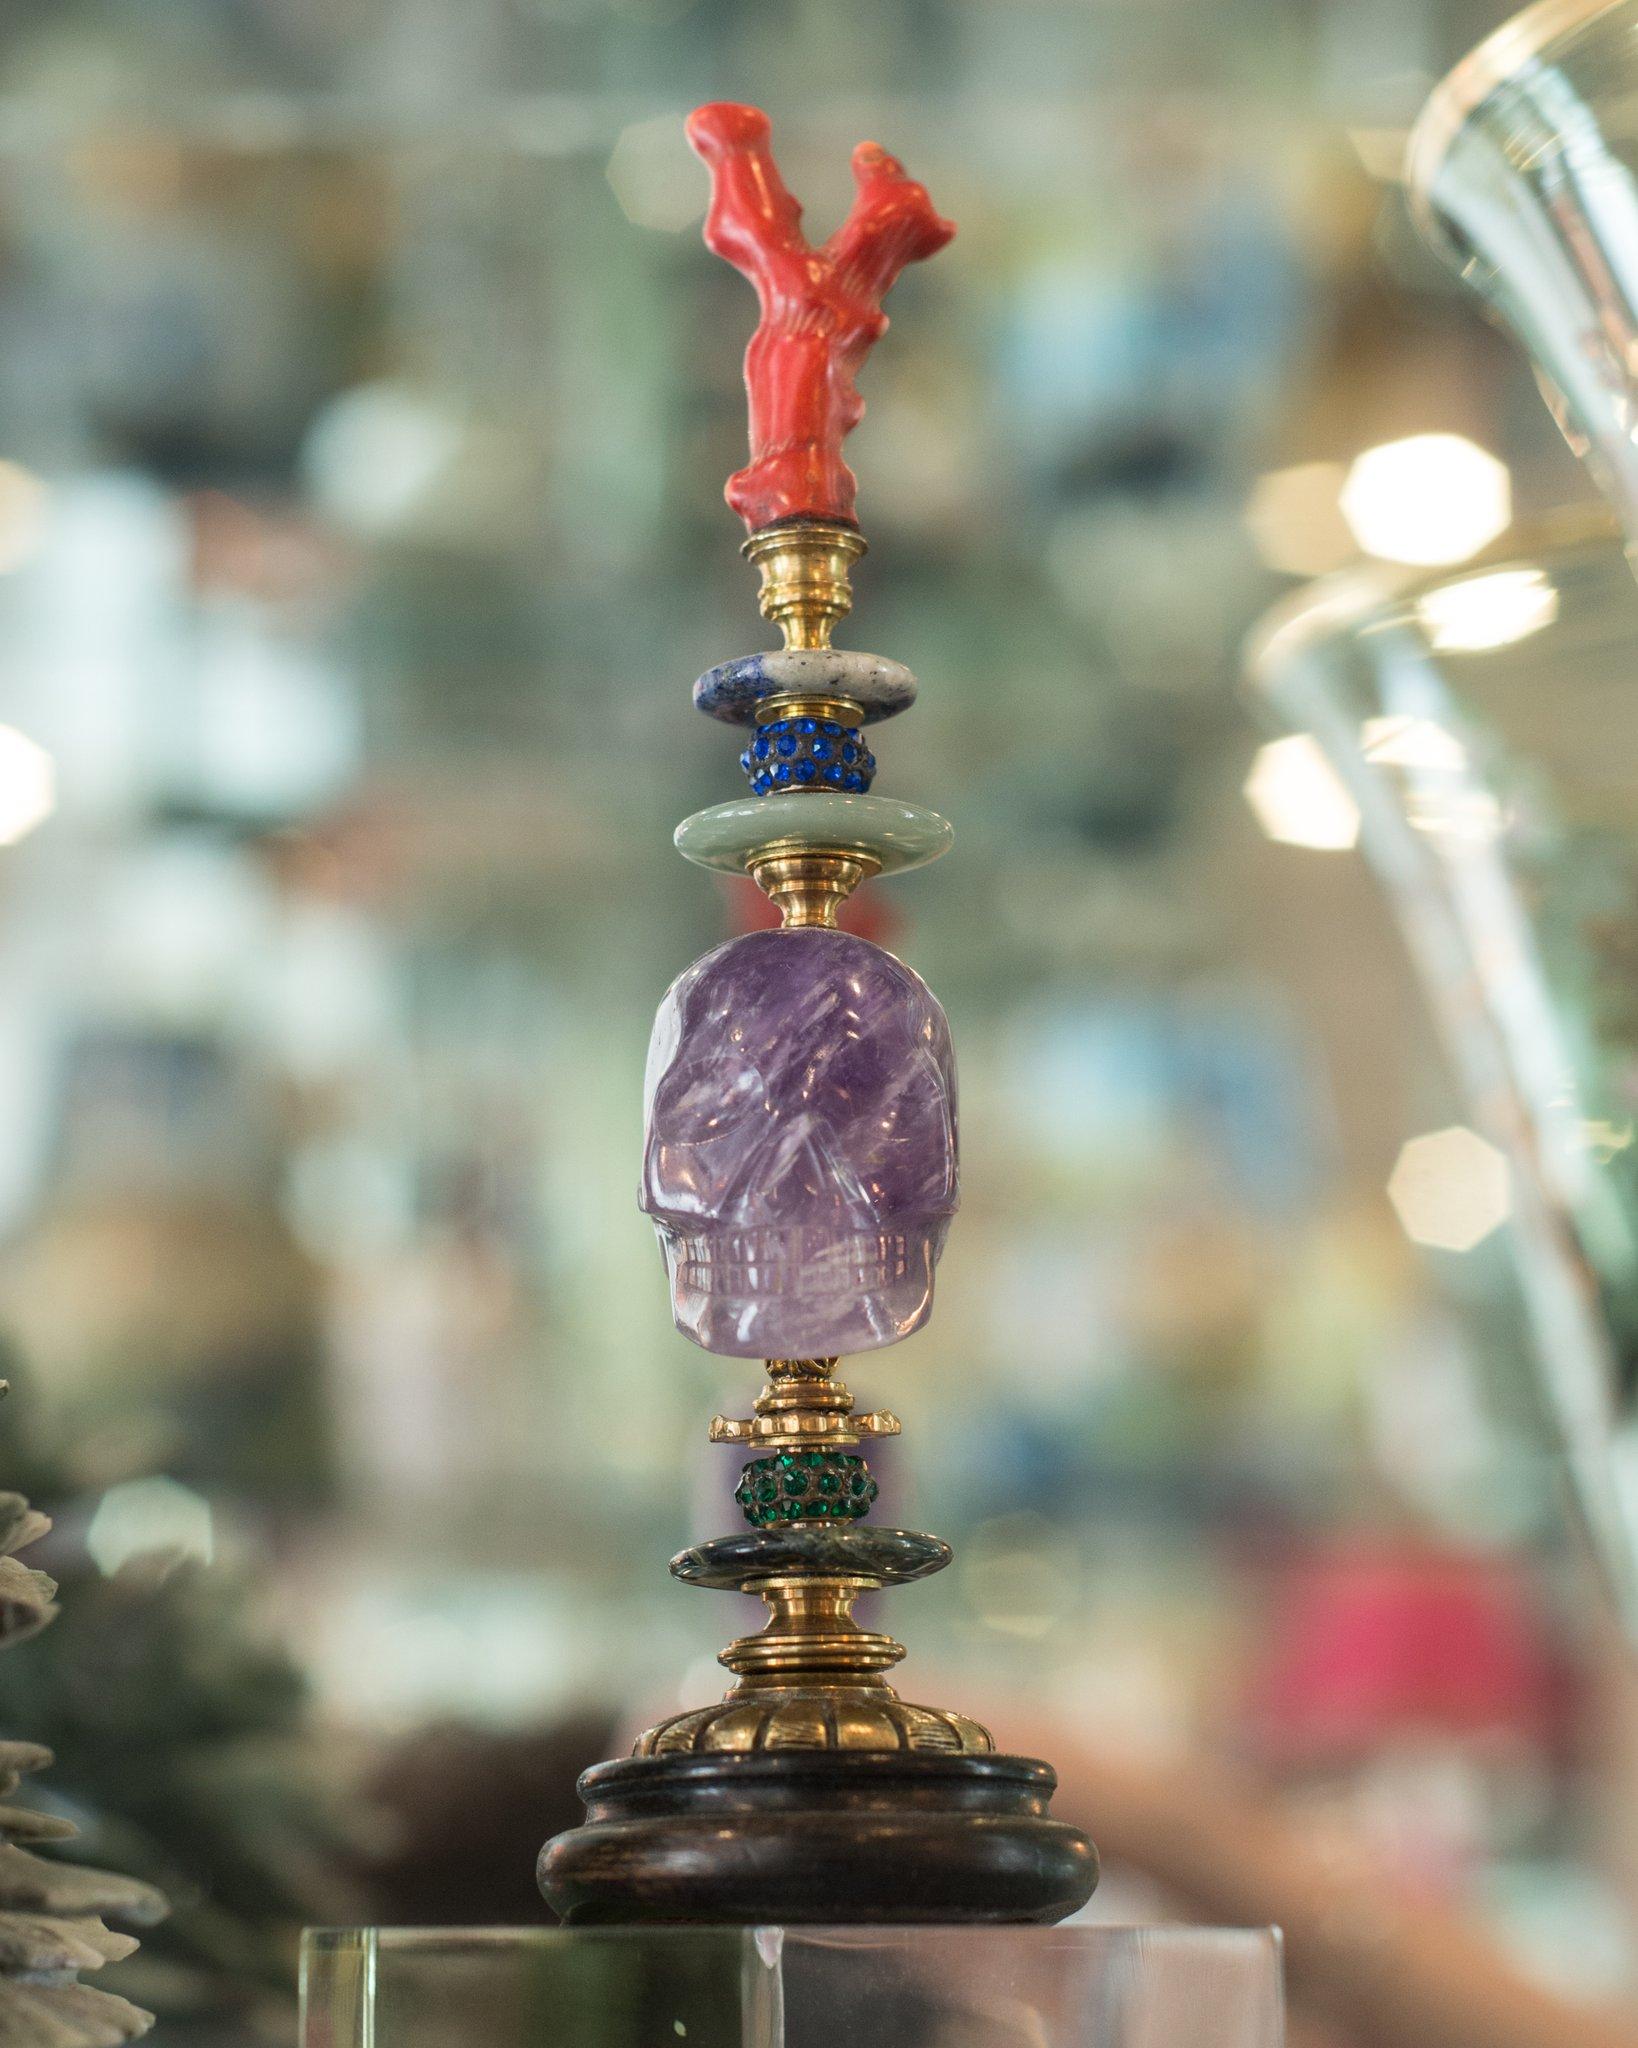 A one of a kind sculptural objet consisting of a carved amethyst skull with an authentic coral branch, semi-precious stones and antique bronze components on a painted wood pedestal by German artist, Dupont.

Klaus Dupont’s stylistically unique